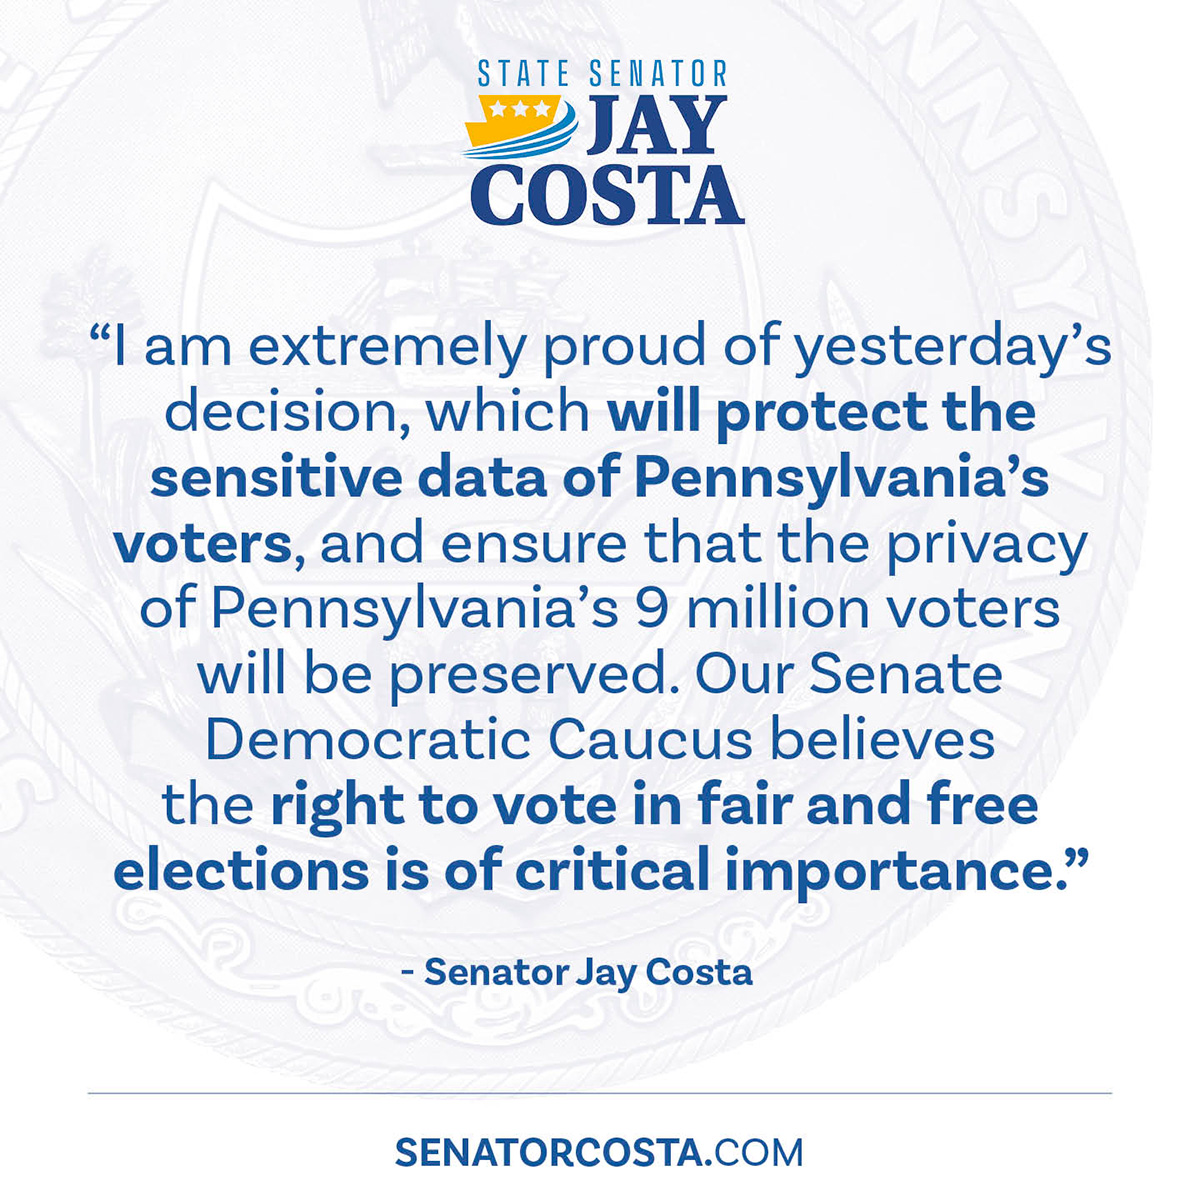 “I am extremely proud of yesterday’s decision, which will protect the sensitive data of Pennsylvania’s voters, and ensure that the privacy of Pennsylvania’s 9 million voters will be preserved,” said Senator Costa.